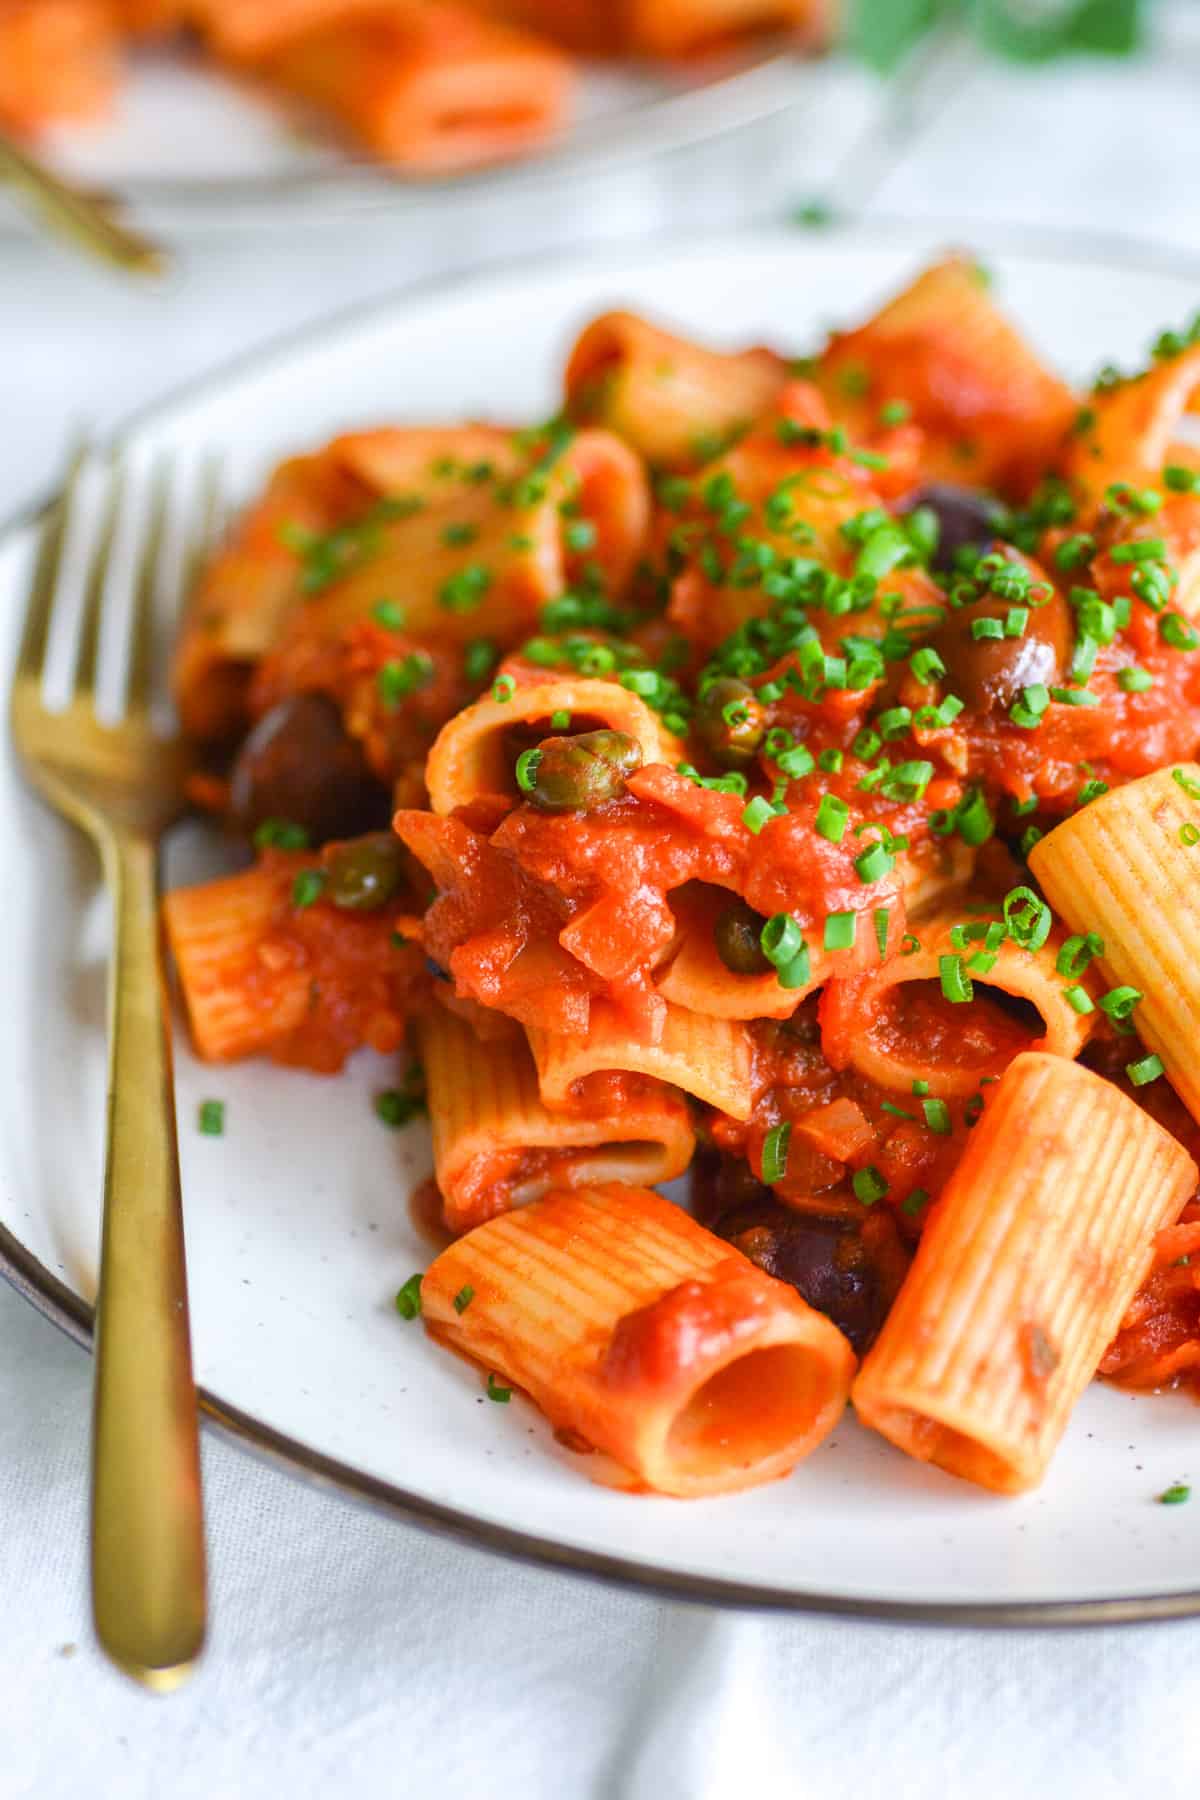 Vegan Pasta Puttanesca with rigatoni on a plate garnished with chives.